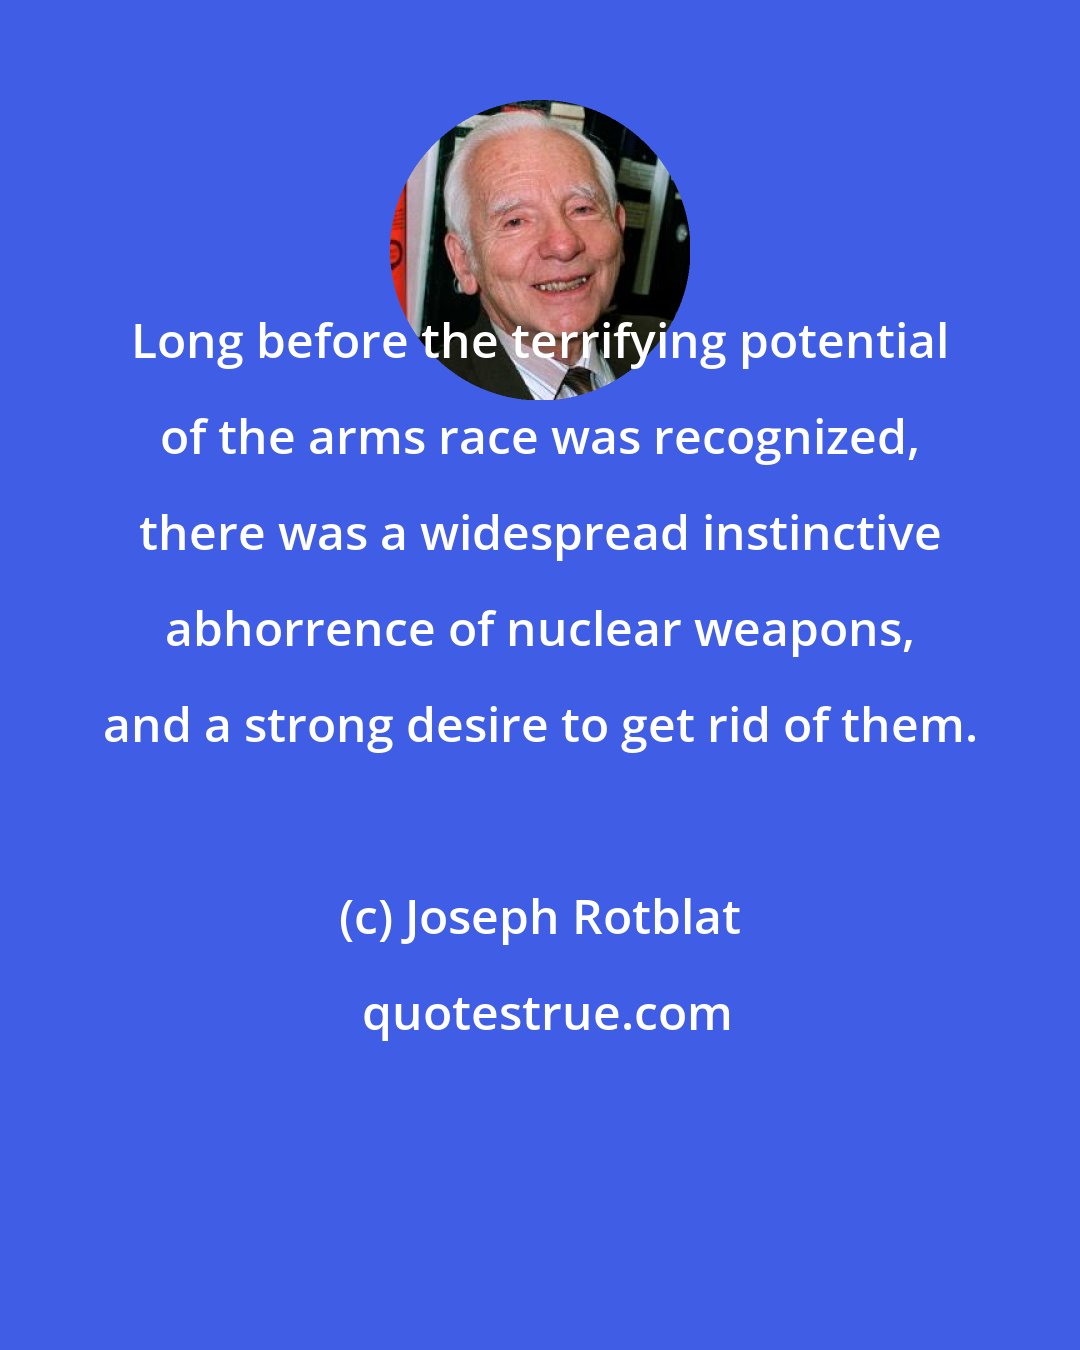 Joseph Rotblat: Long before the terrifying potential of the arms race was recognized, there was a widespread instinctive abhorrence of nuclear weapons, and a strong desire to get rid of them.